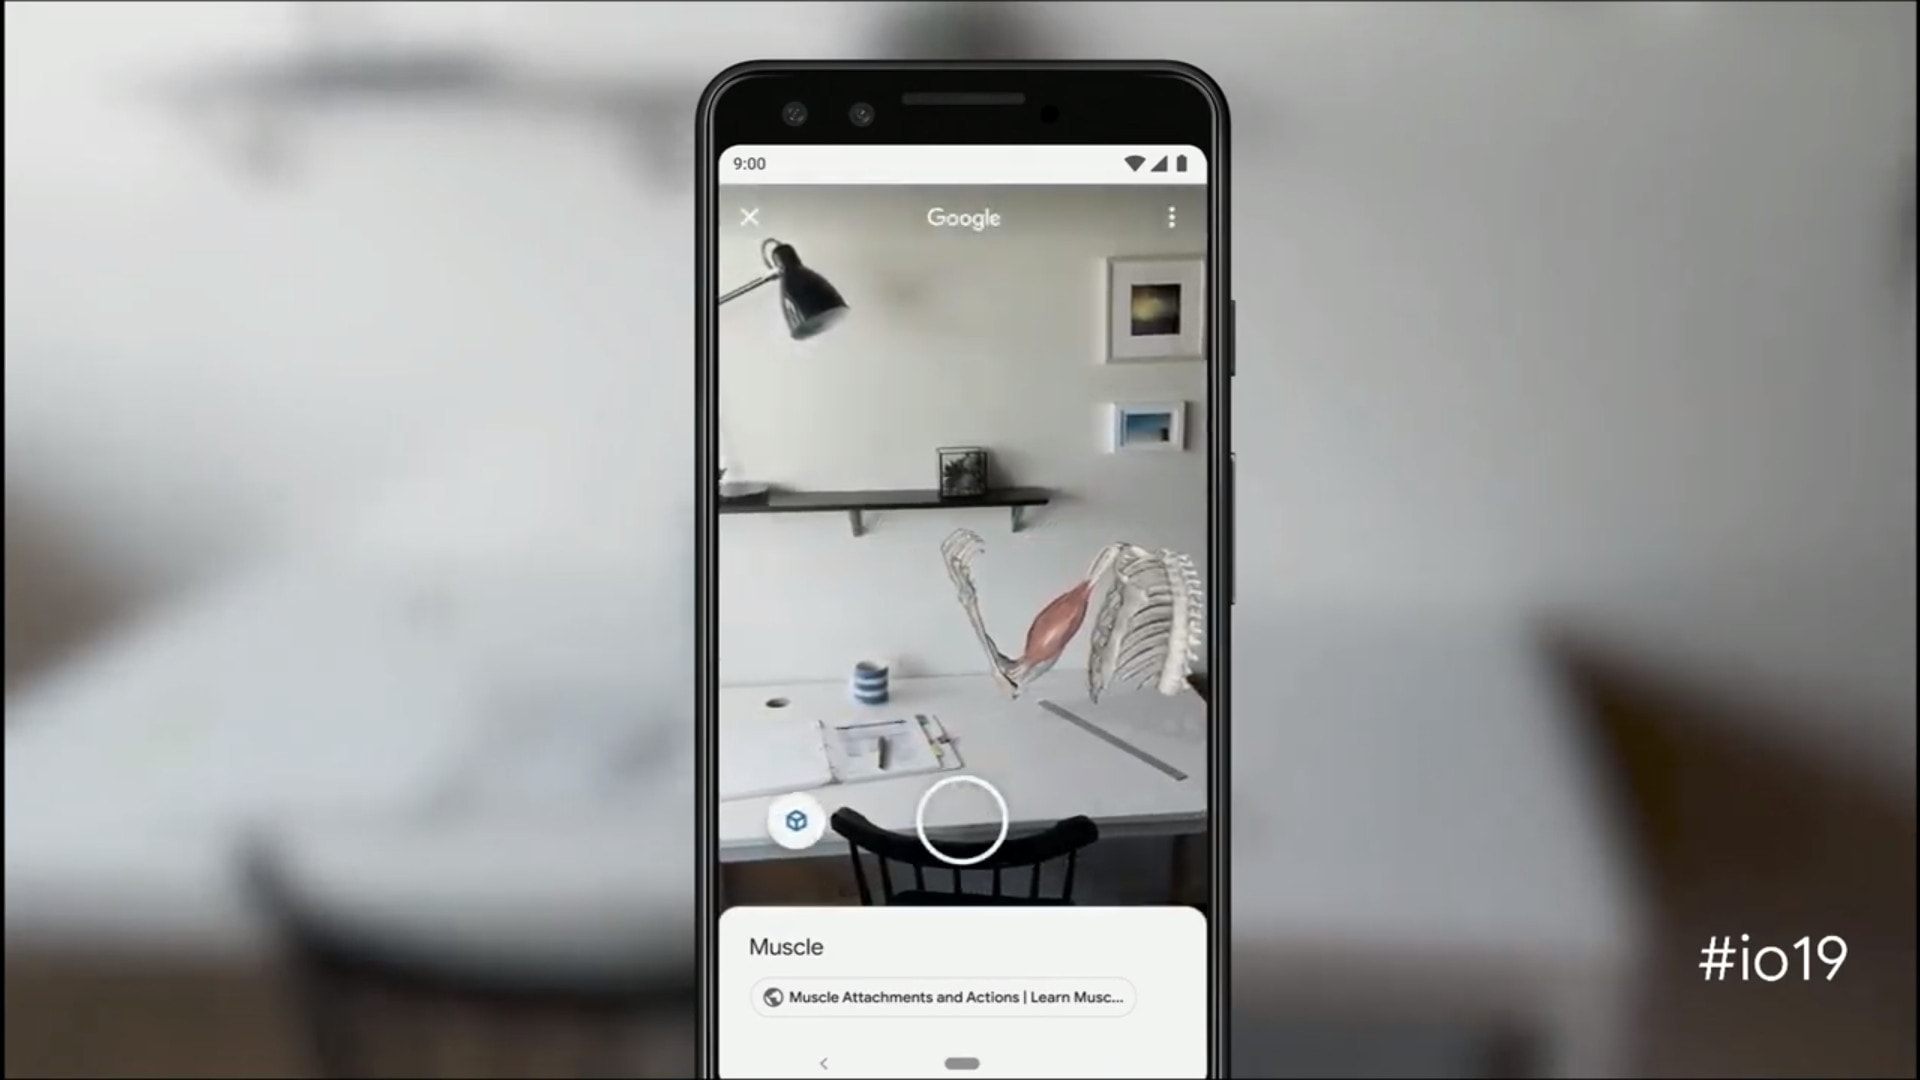 Google Search with augmented reality models.